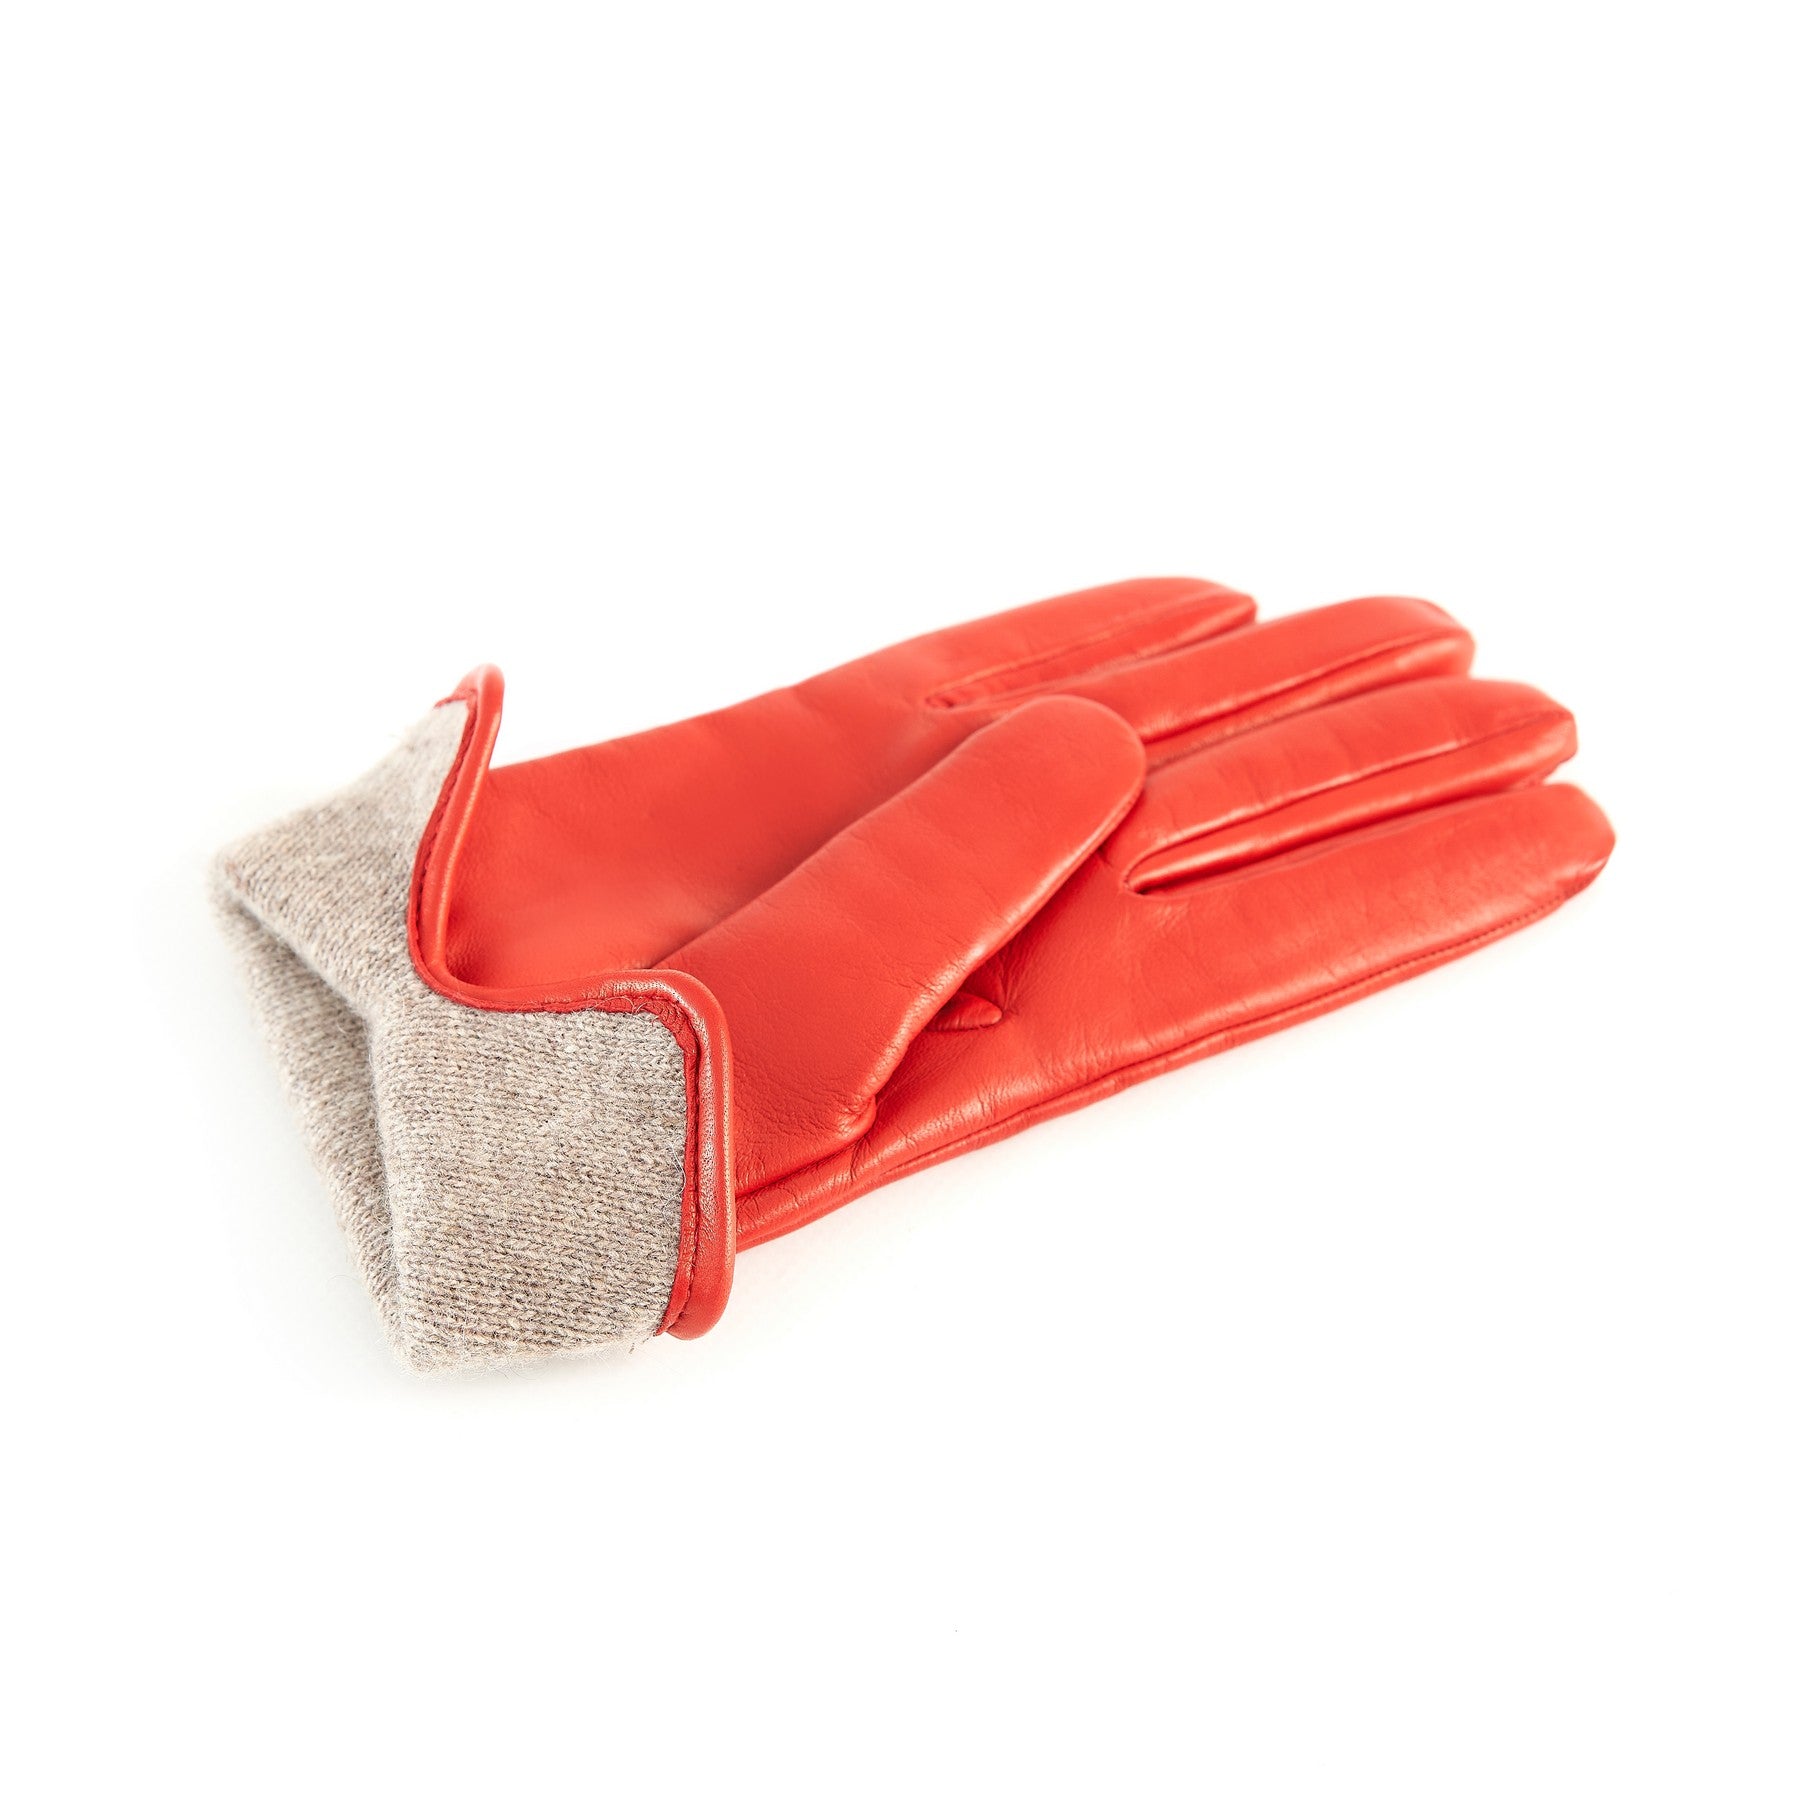 Women’s basic red soft nappa leather gloves with palm opening and mix cashmere lining